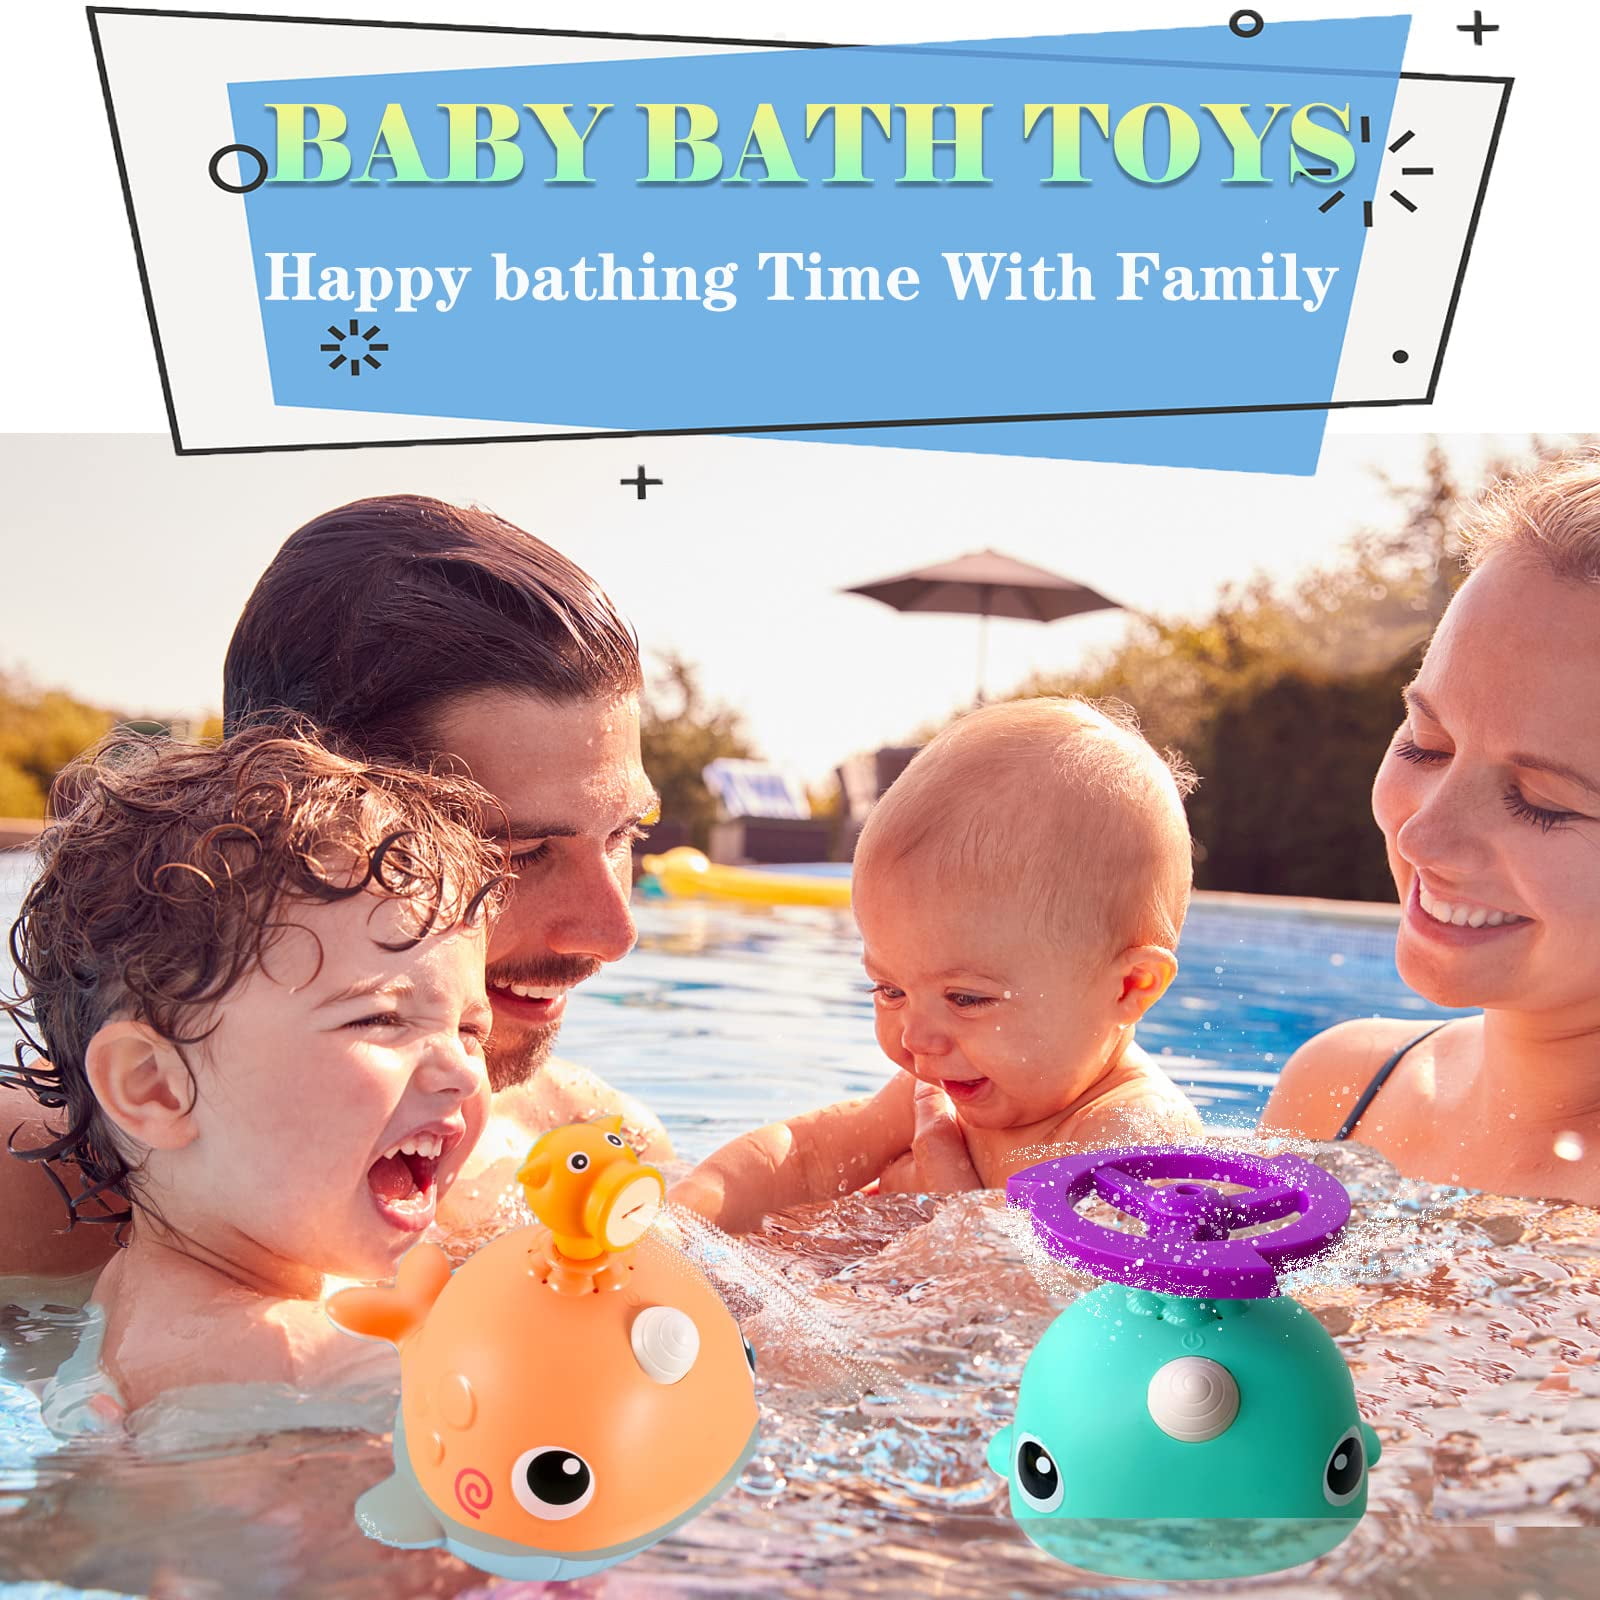 Bath Toys For Toddlers 1-3, Bathtub Toys For Kids Age 2-4, Toddler Bath  Toys Contains 4 Stackable Cups And 2 Boats And 2 Whale Shaped Spoons, Best  Sho